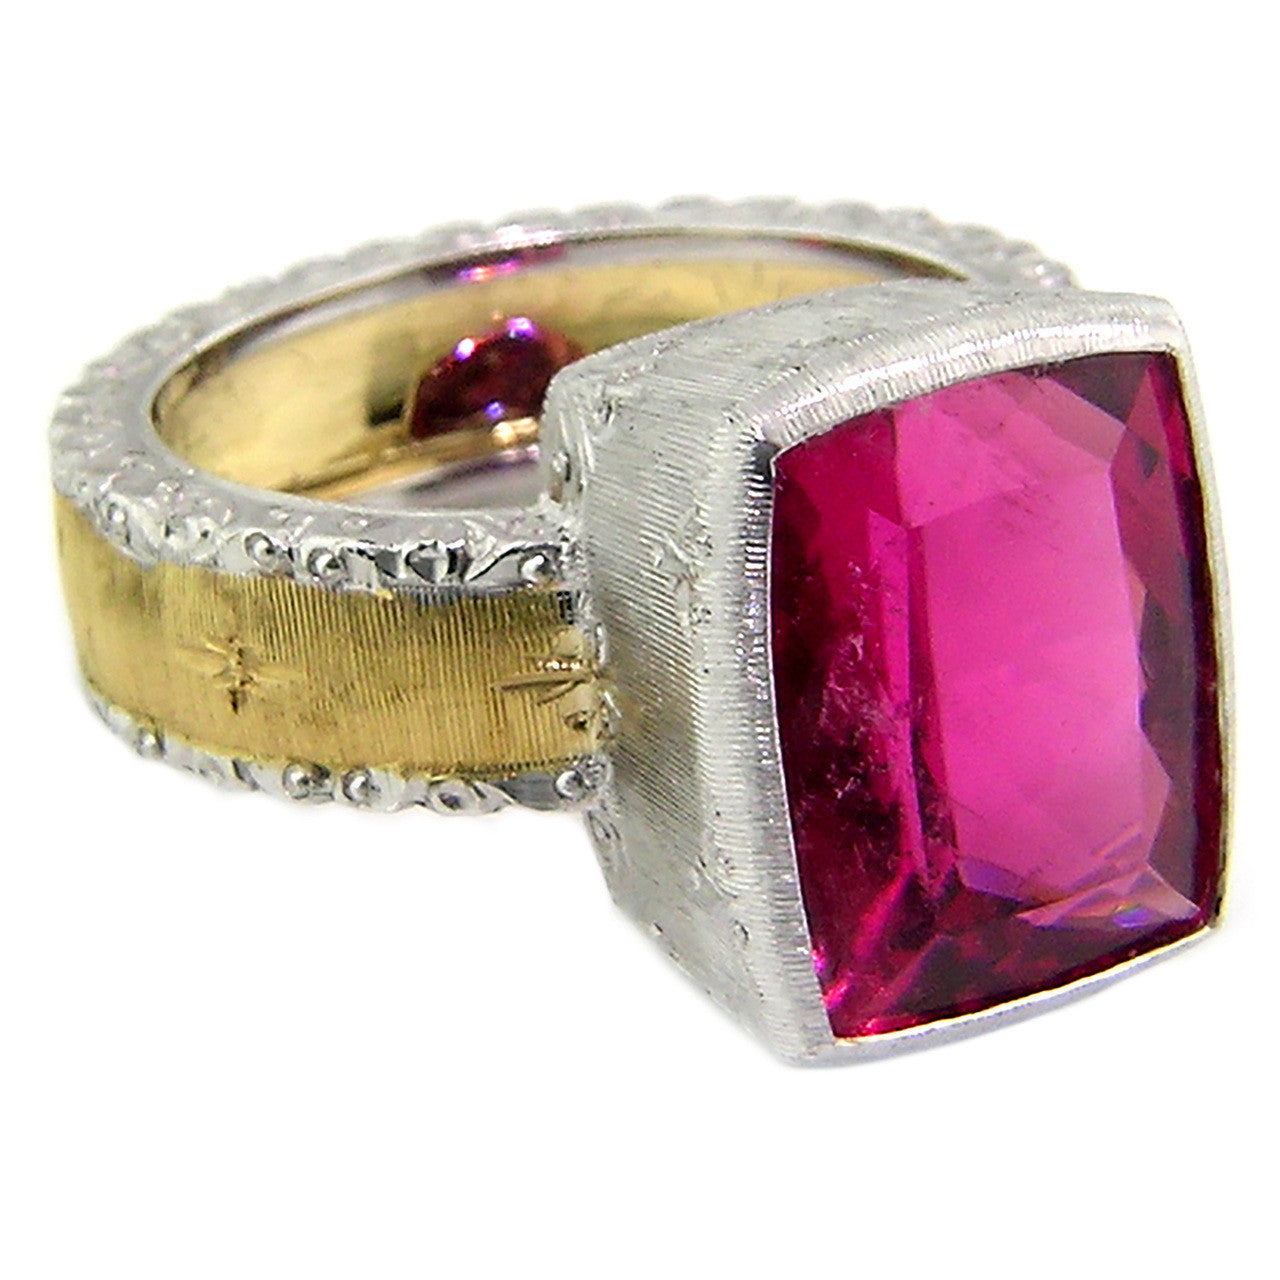 Rubellite Tourmaline 18kt Sienna Ring made in Florence, Italy by Cynthia Scott Jewelry